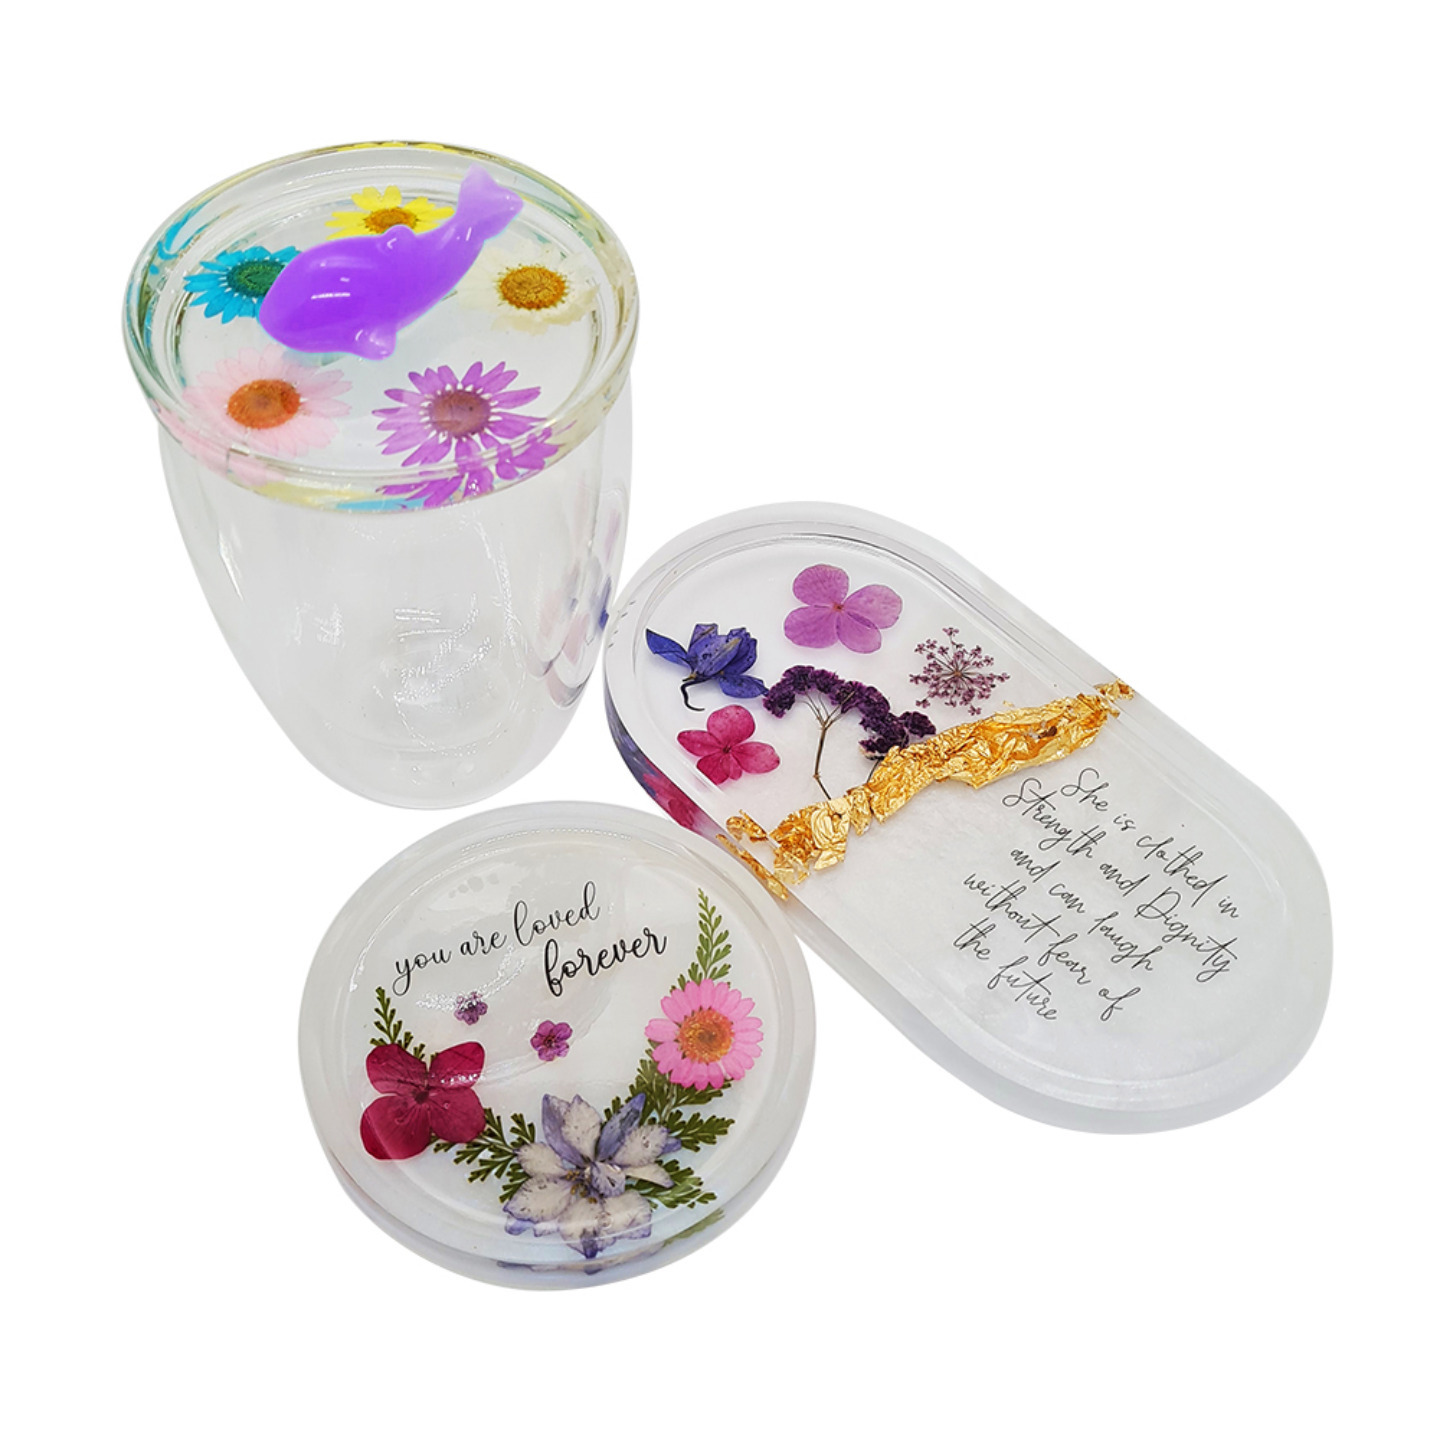 Love-U-mom set trinket tray with matching coaster, double glaze glass & cup cover